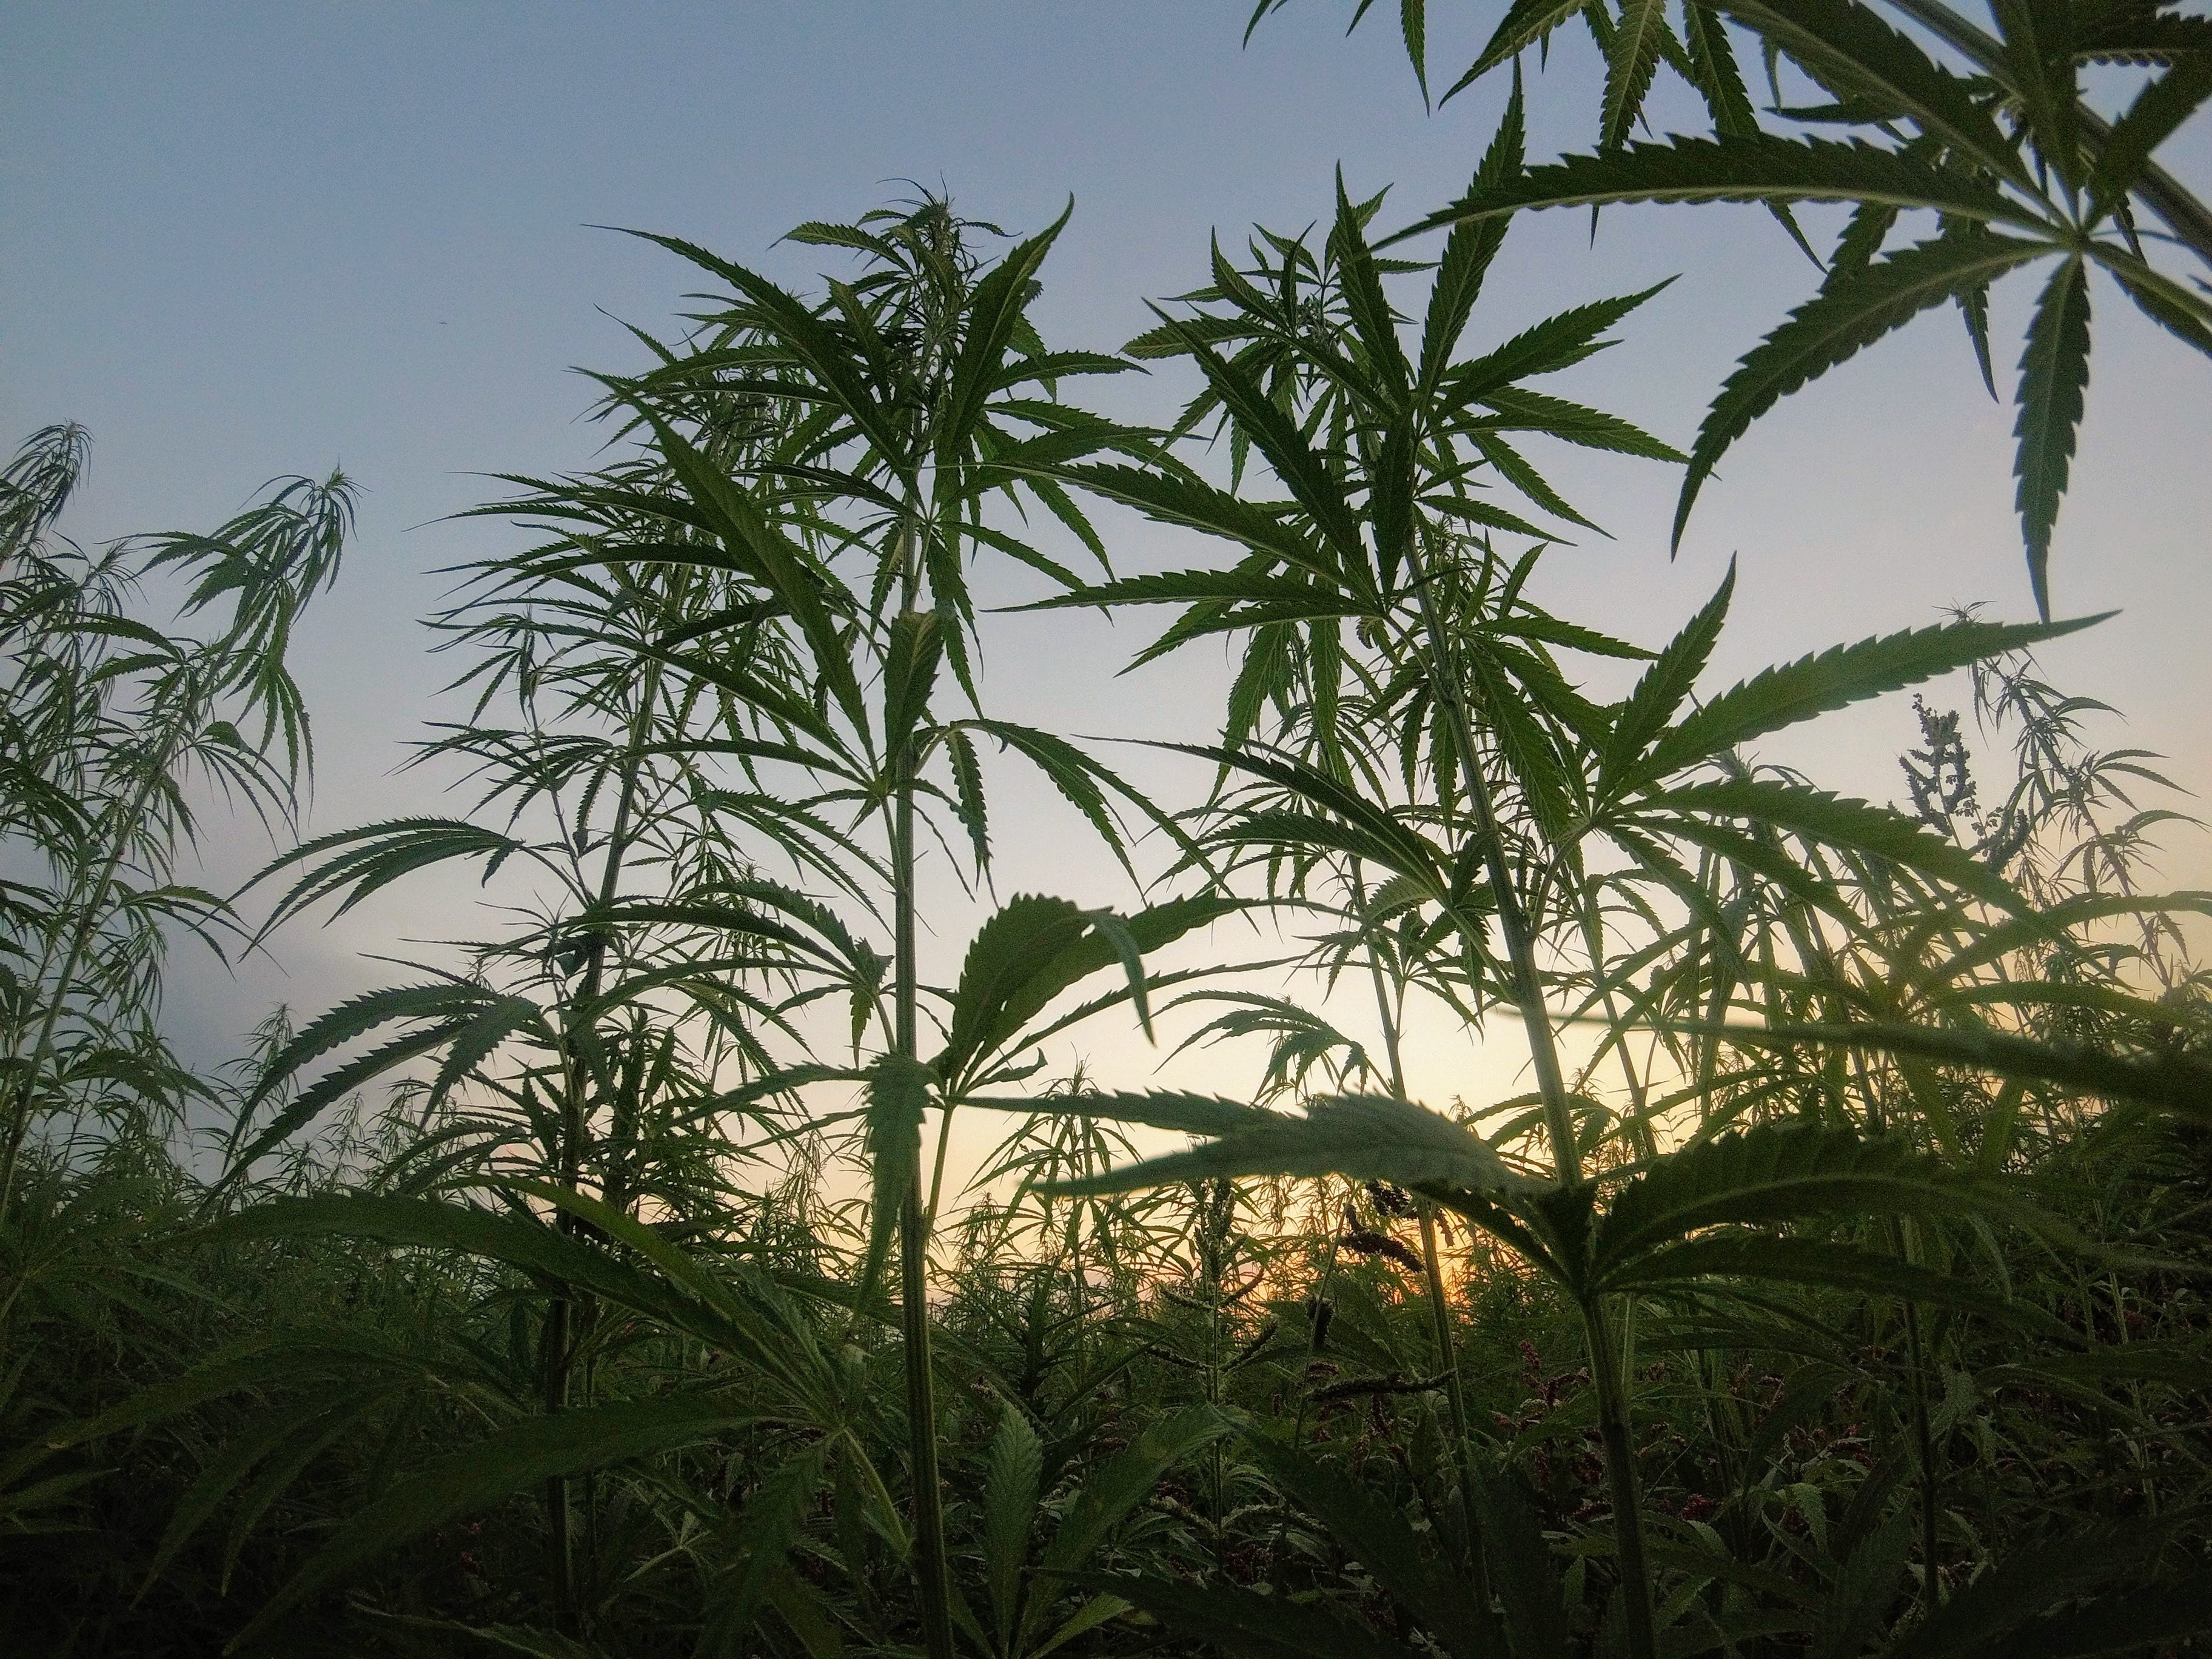 Tall cannabis plants with different strains of weed grow outdoors at sunset.